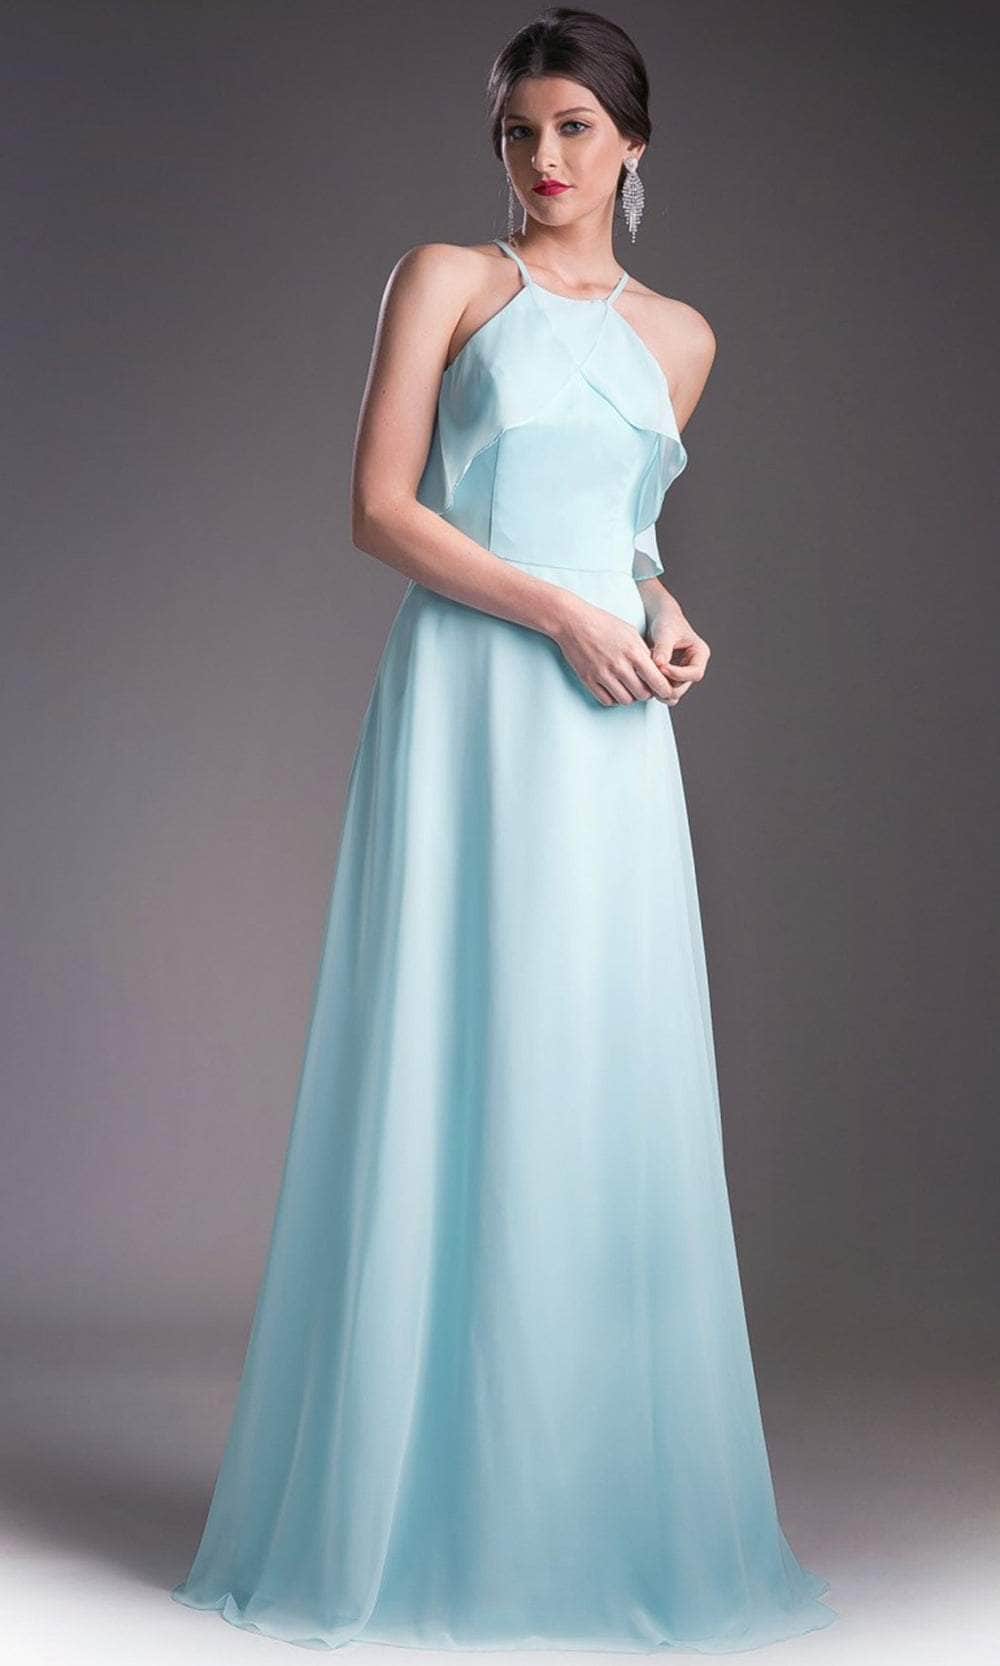 Cinderella Divine 13032 - Simple Thin Strapped Halter Dress Special Occasion Dress 4 / Mint